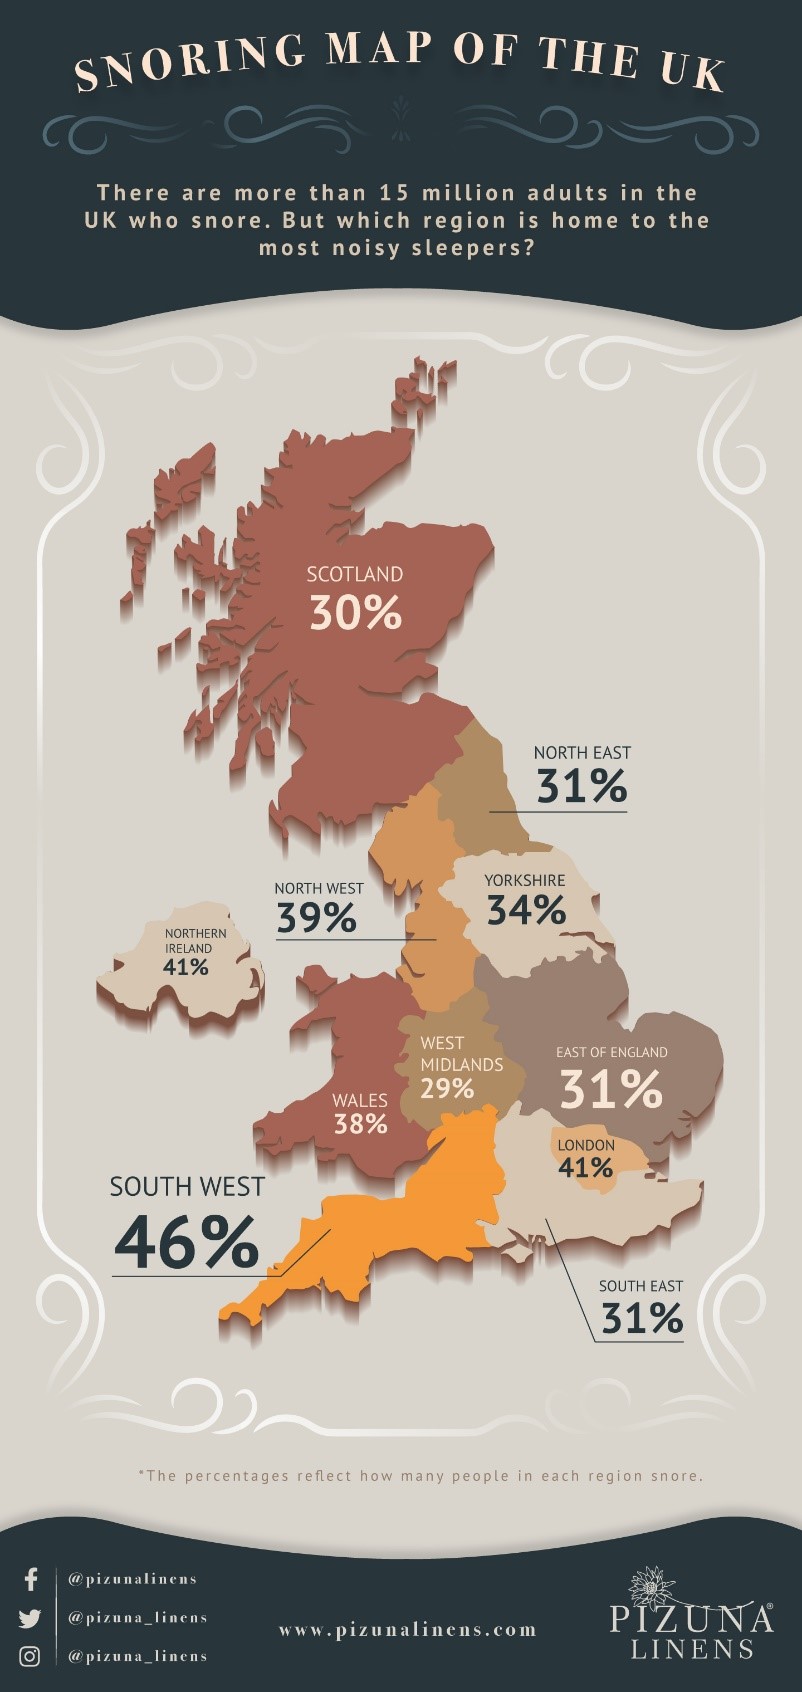 Snoring Map of the UK